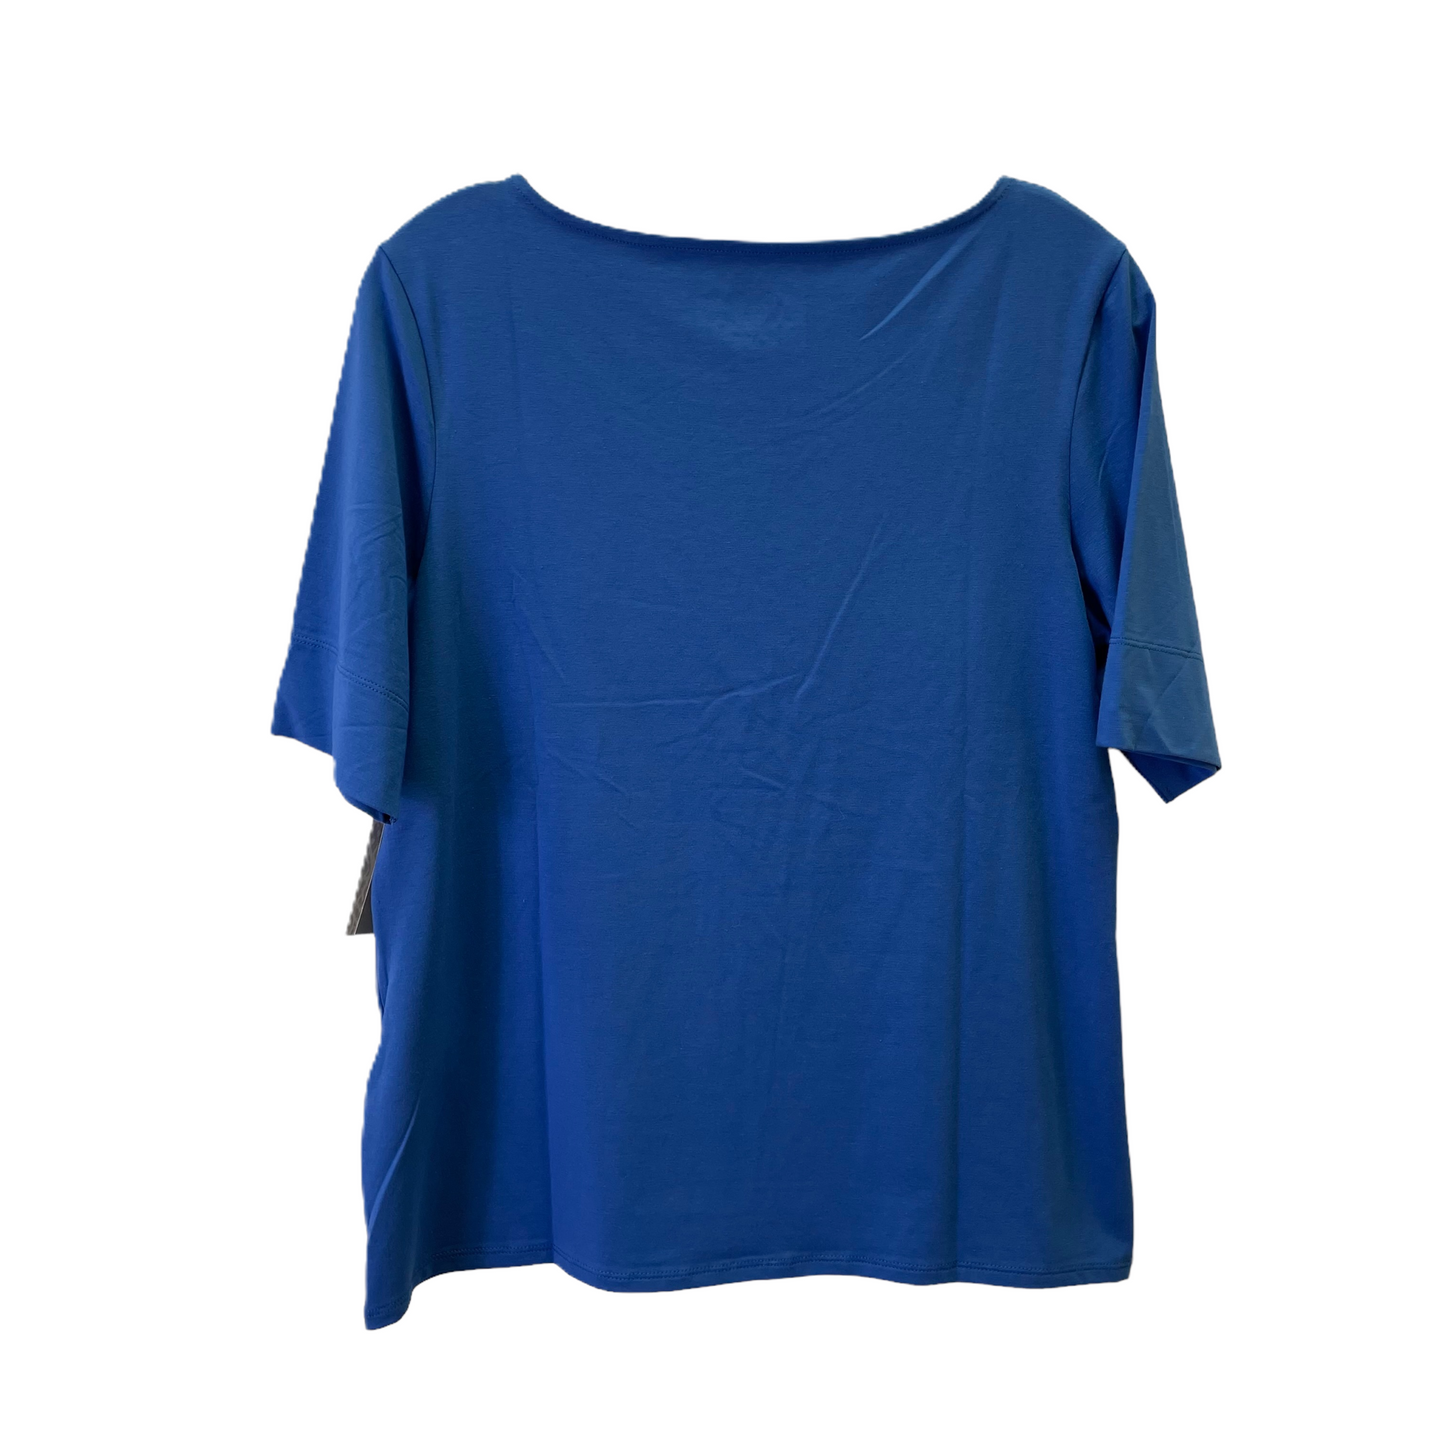 Blue Top Short Sleeve Basic By Chicos, Size: M